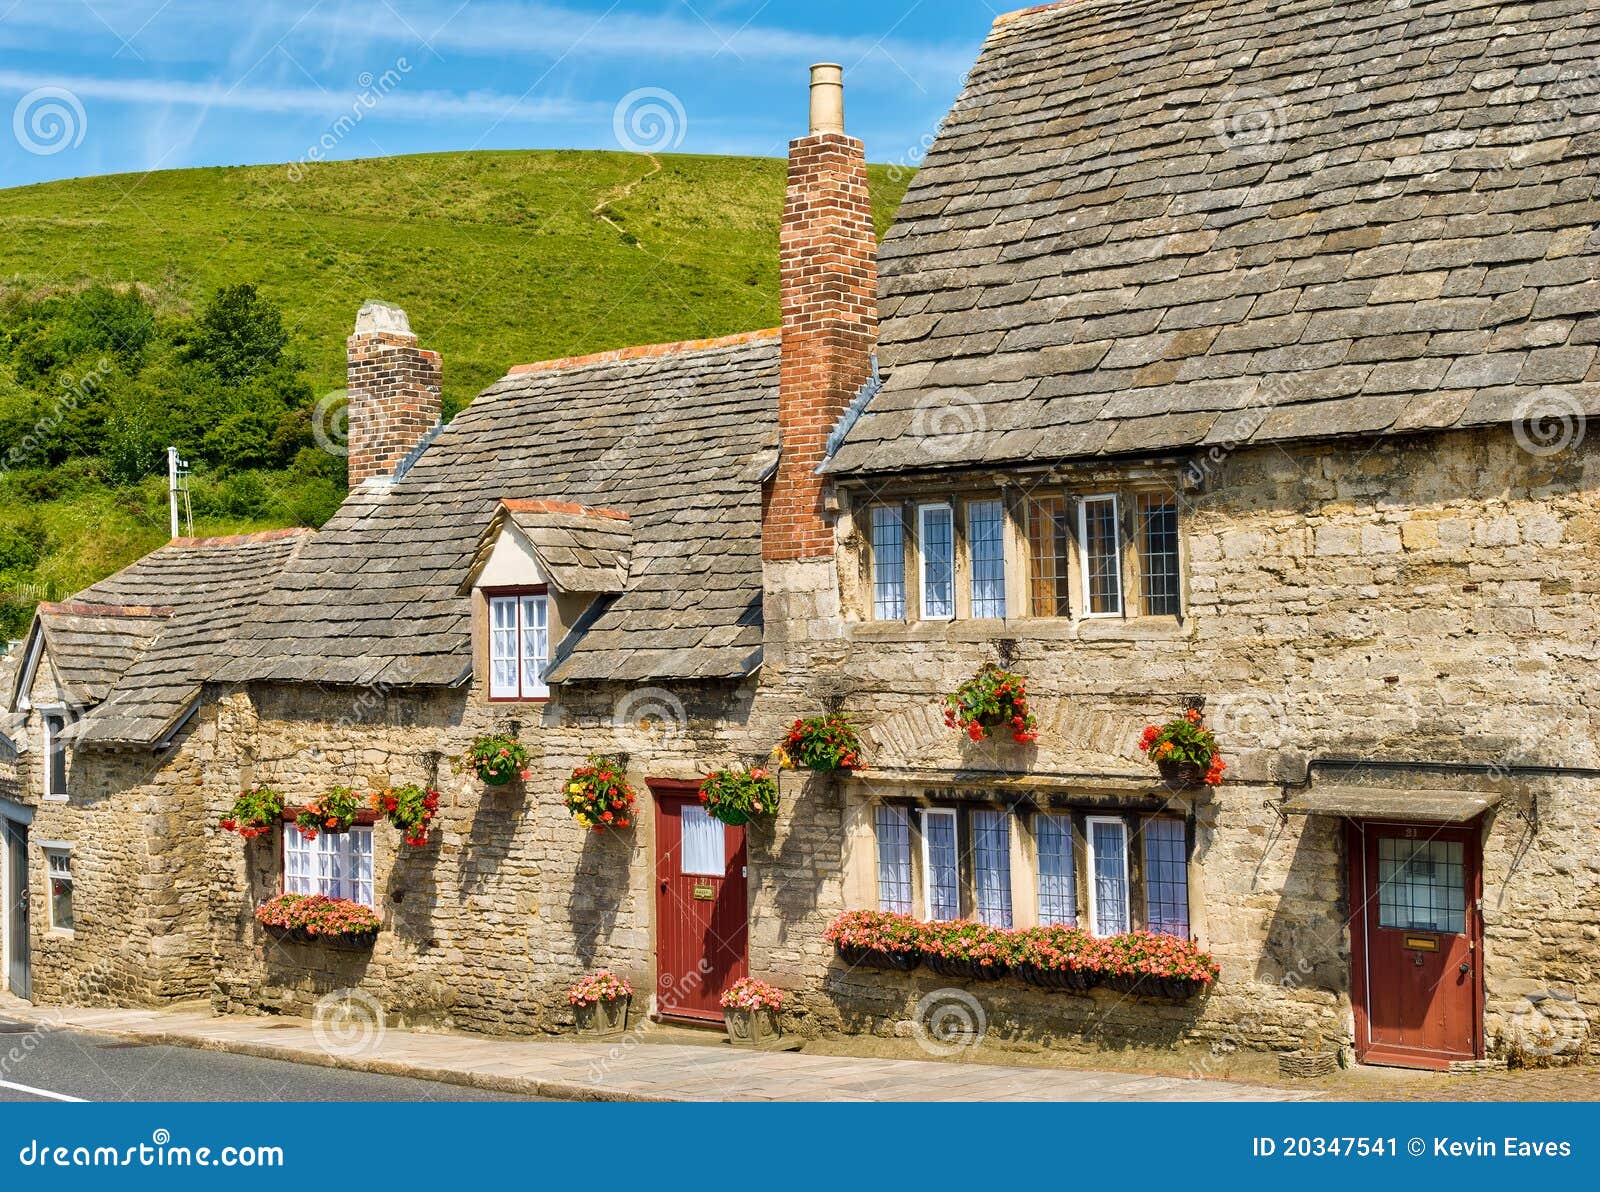 row of limestone cottages in an english village